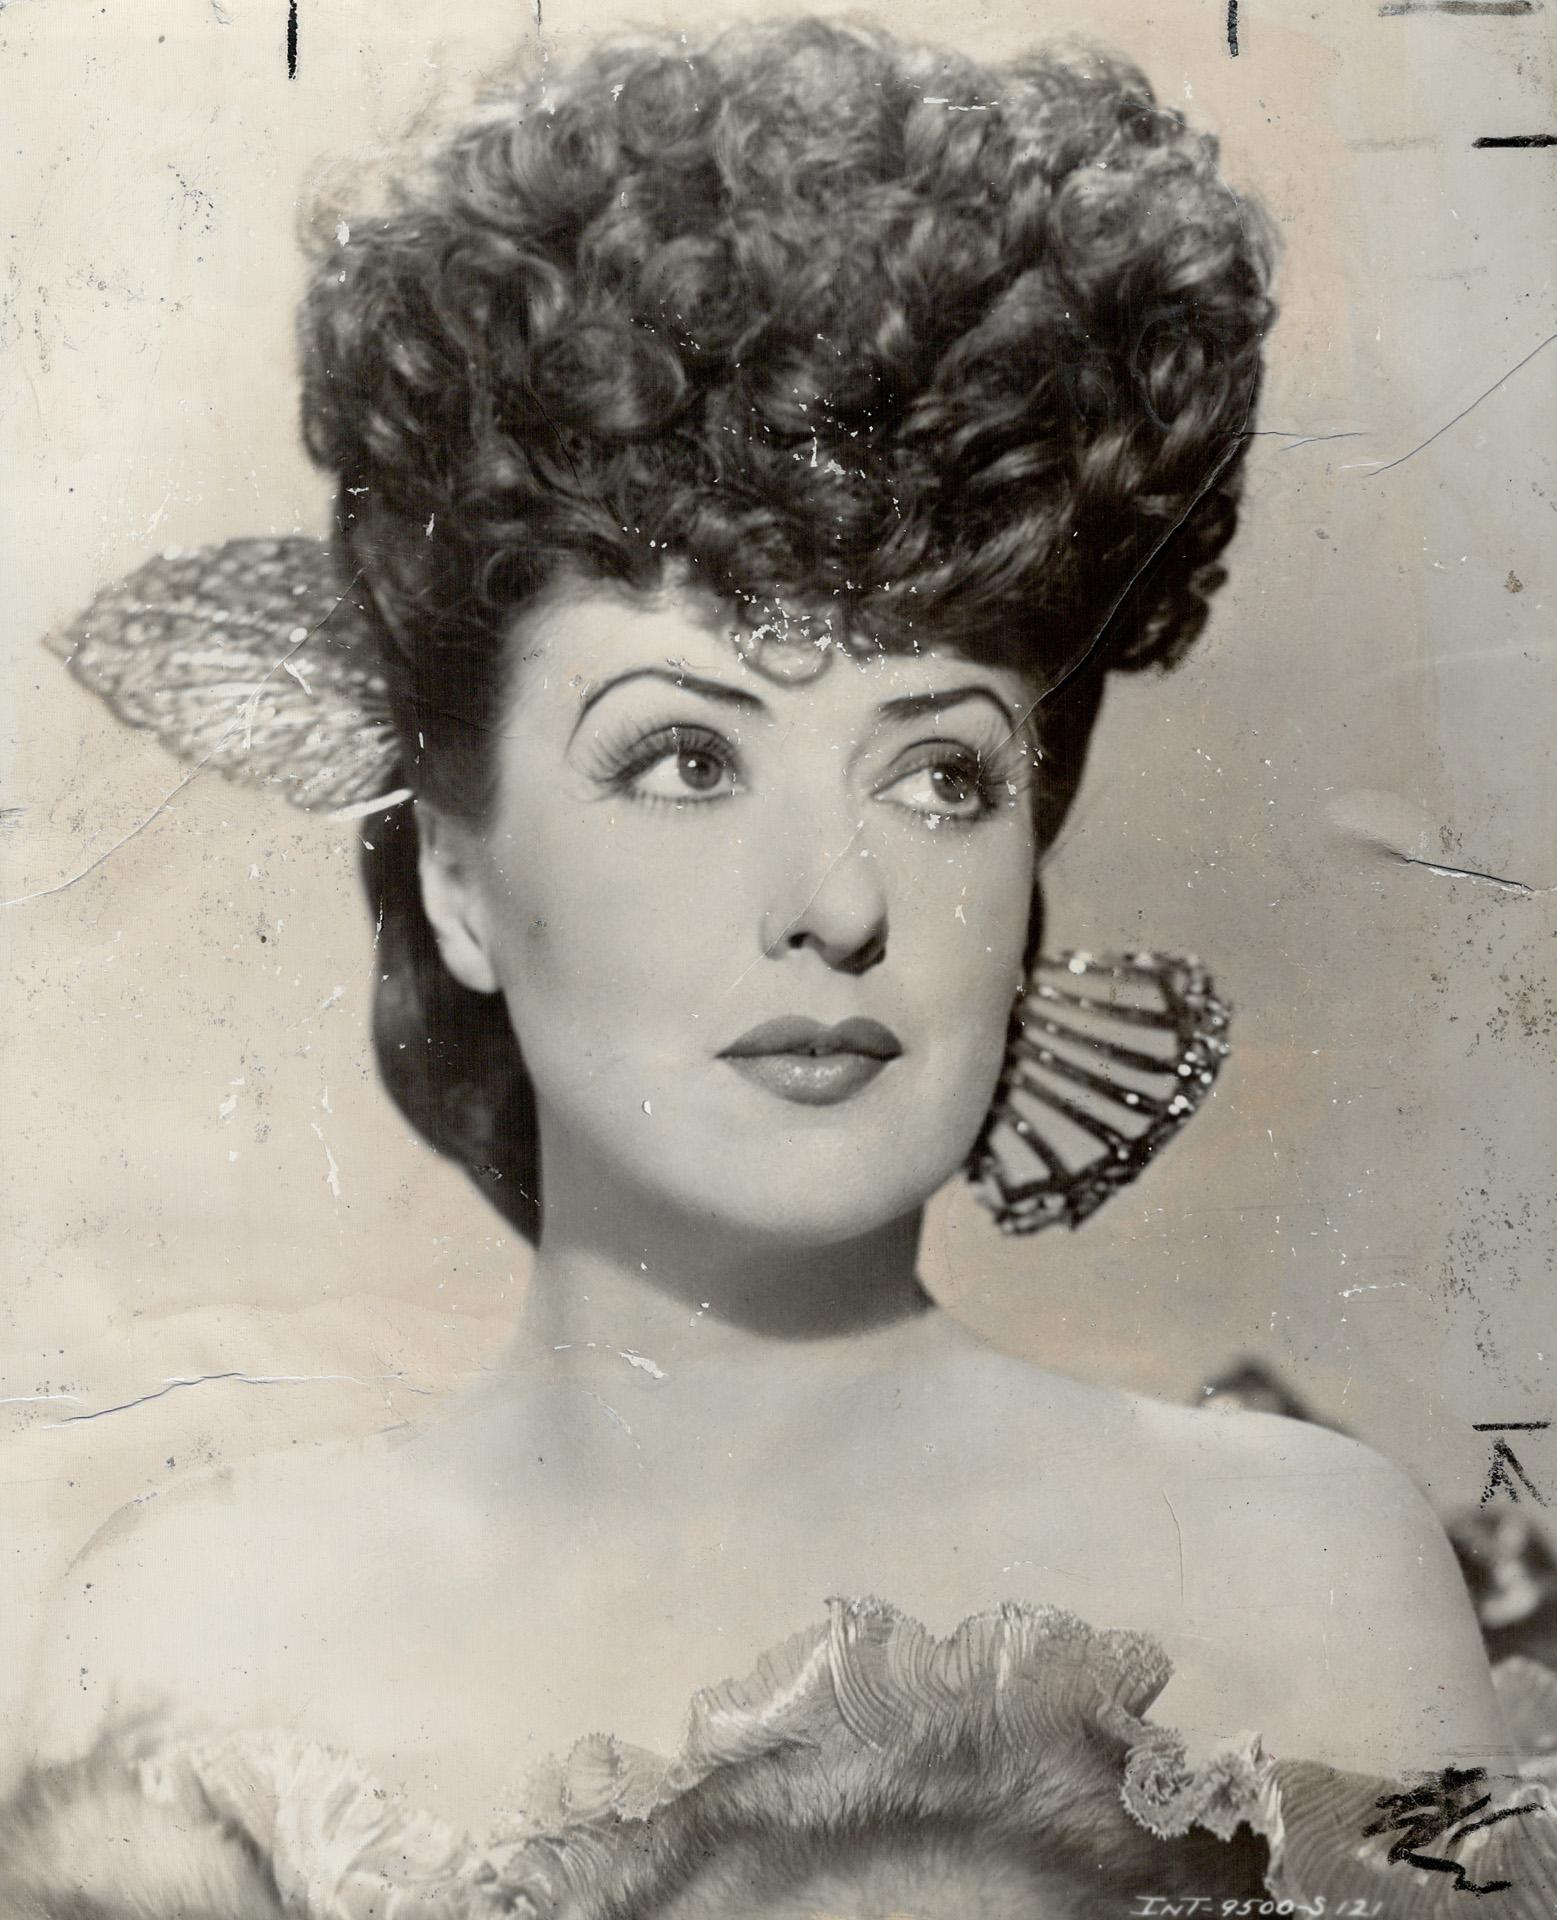 Gypsy Rose Lee All Items Digital Archive Toronto Public Library